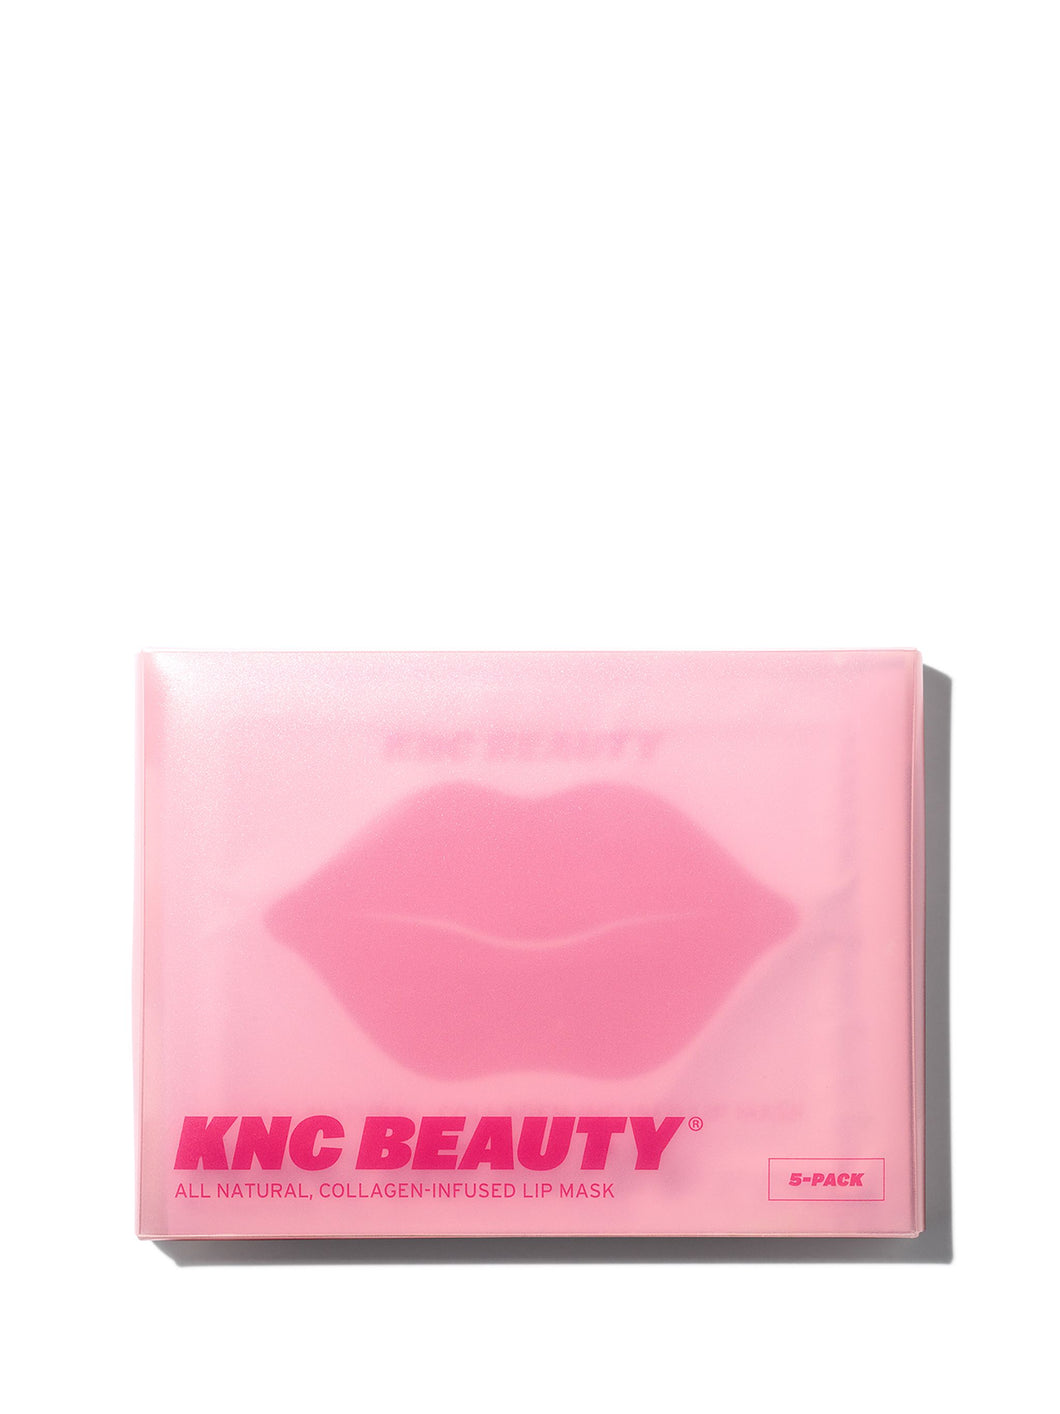 KNC Beauty All Natural Collagen-Infused Lip Mask - 5 Pack